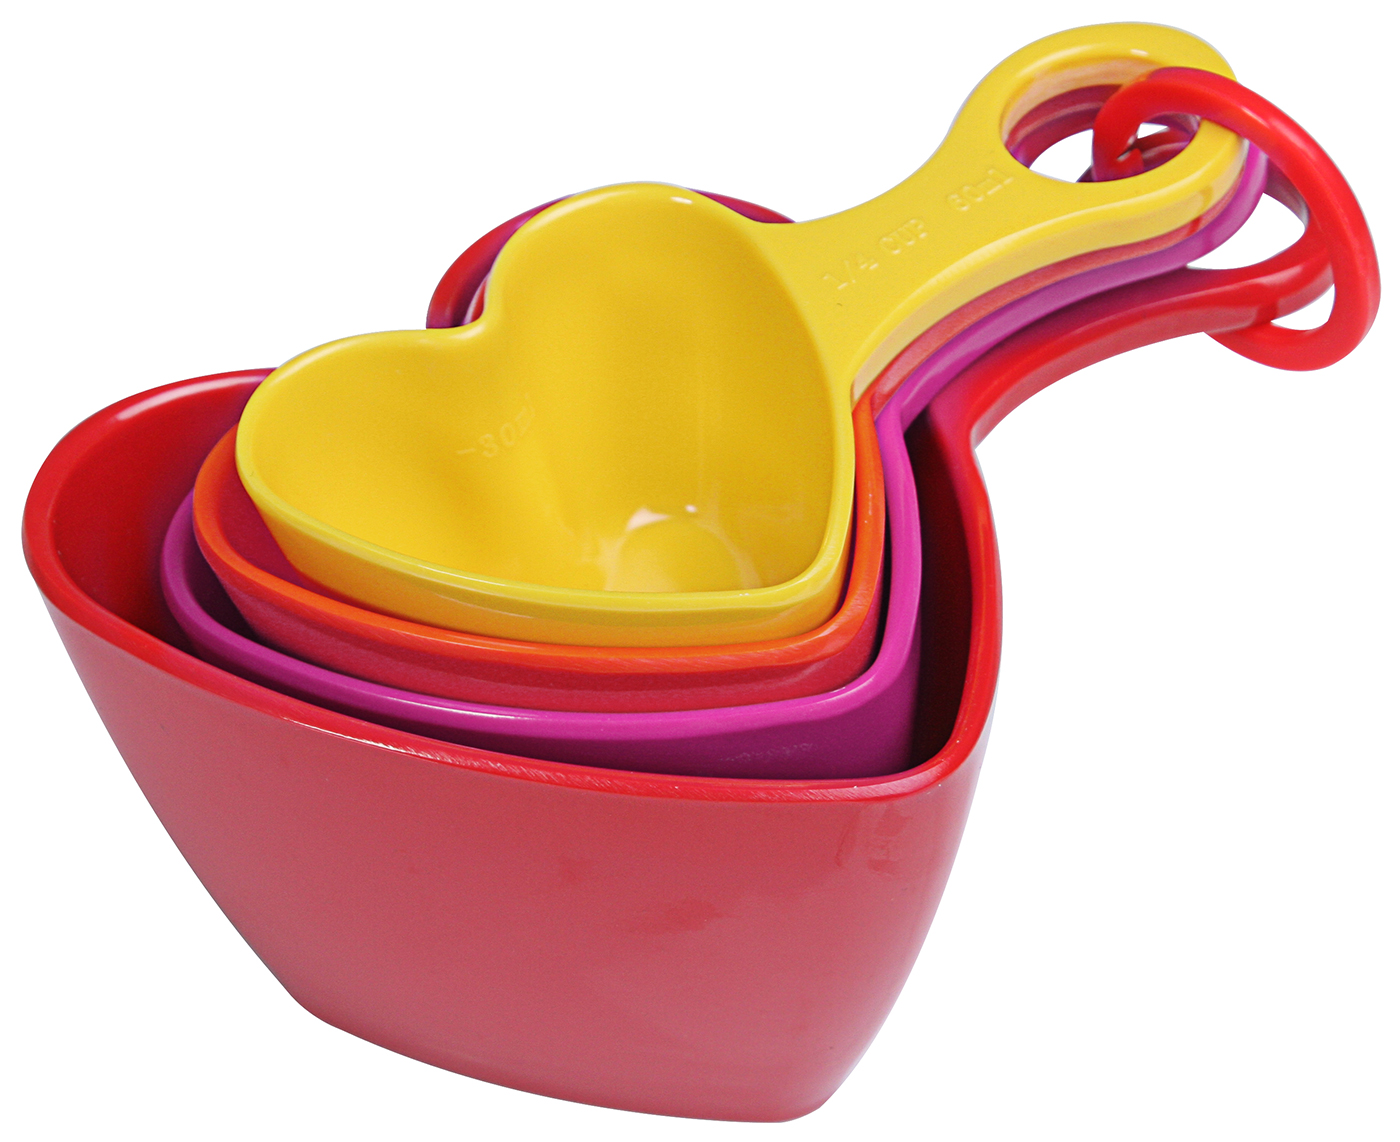 Heart-Shaped Measuring Cups - Set of 4